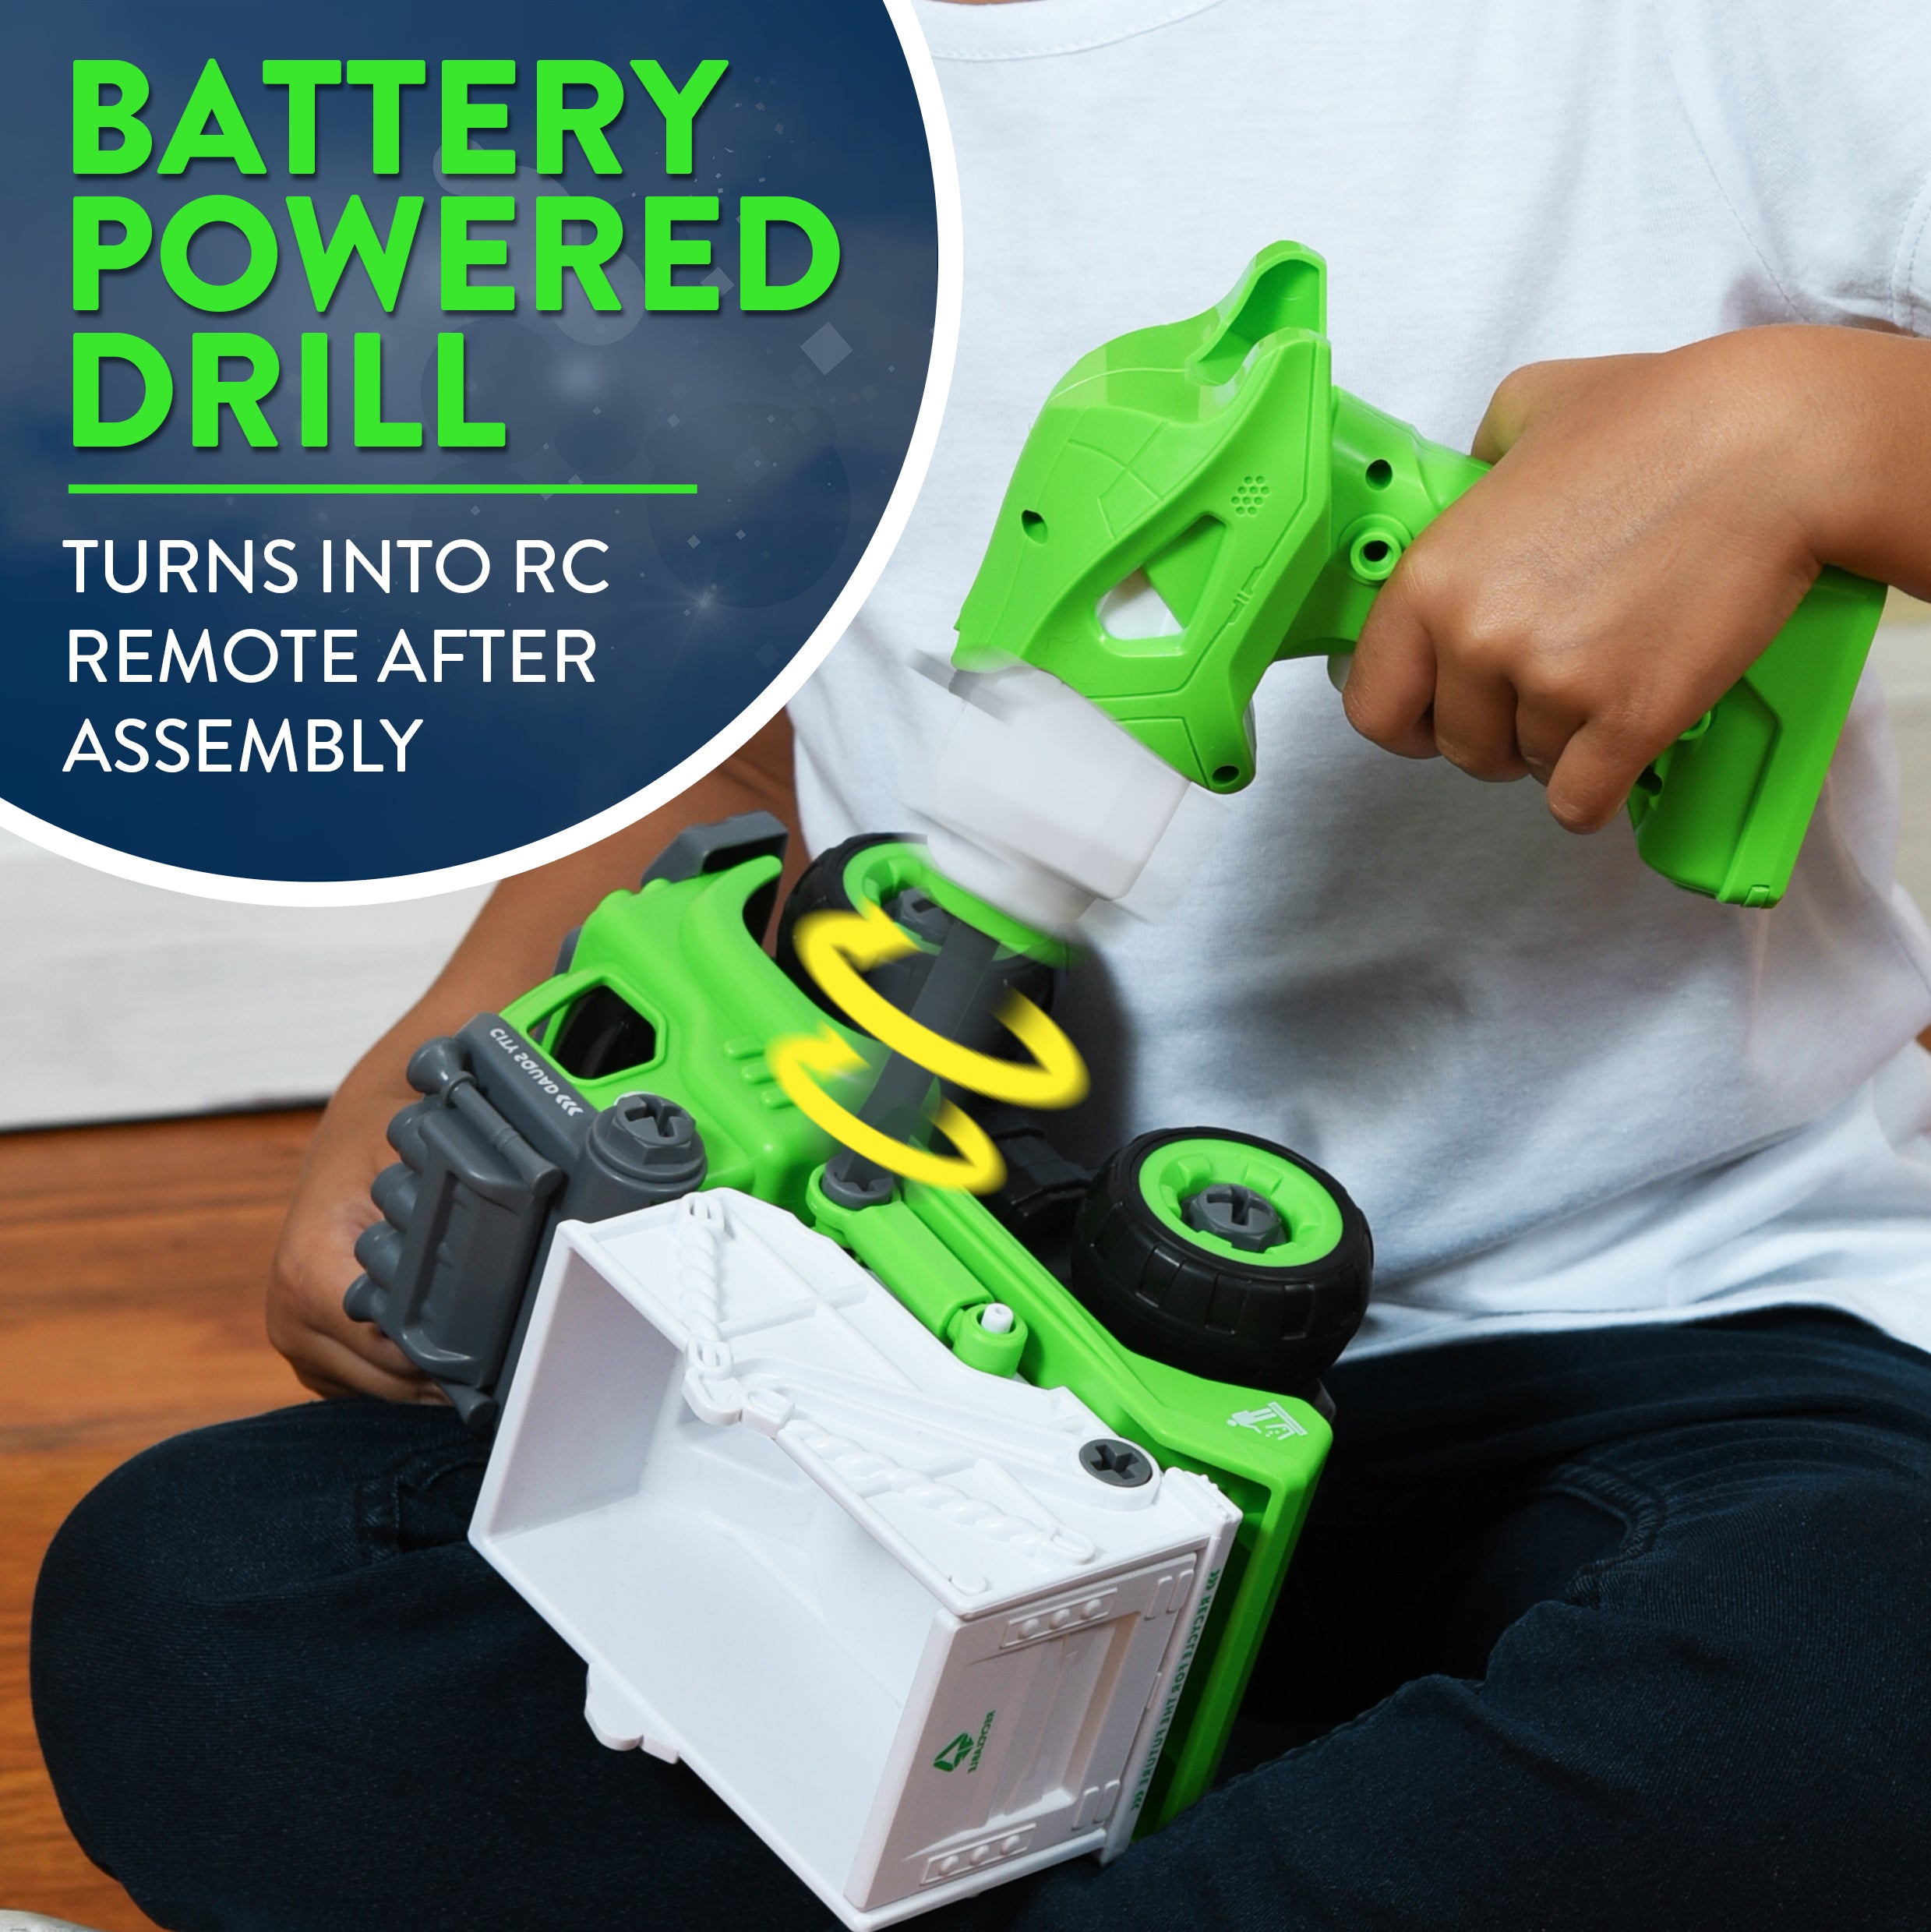 Power Gearz DIY Build and Drive Remote Control Take Apart Car – Kids Ages 3+